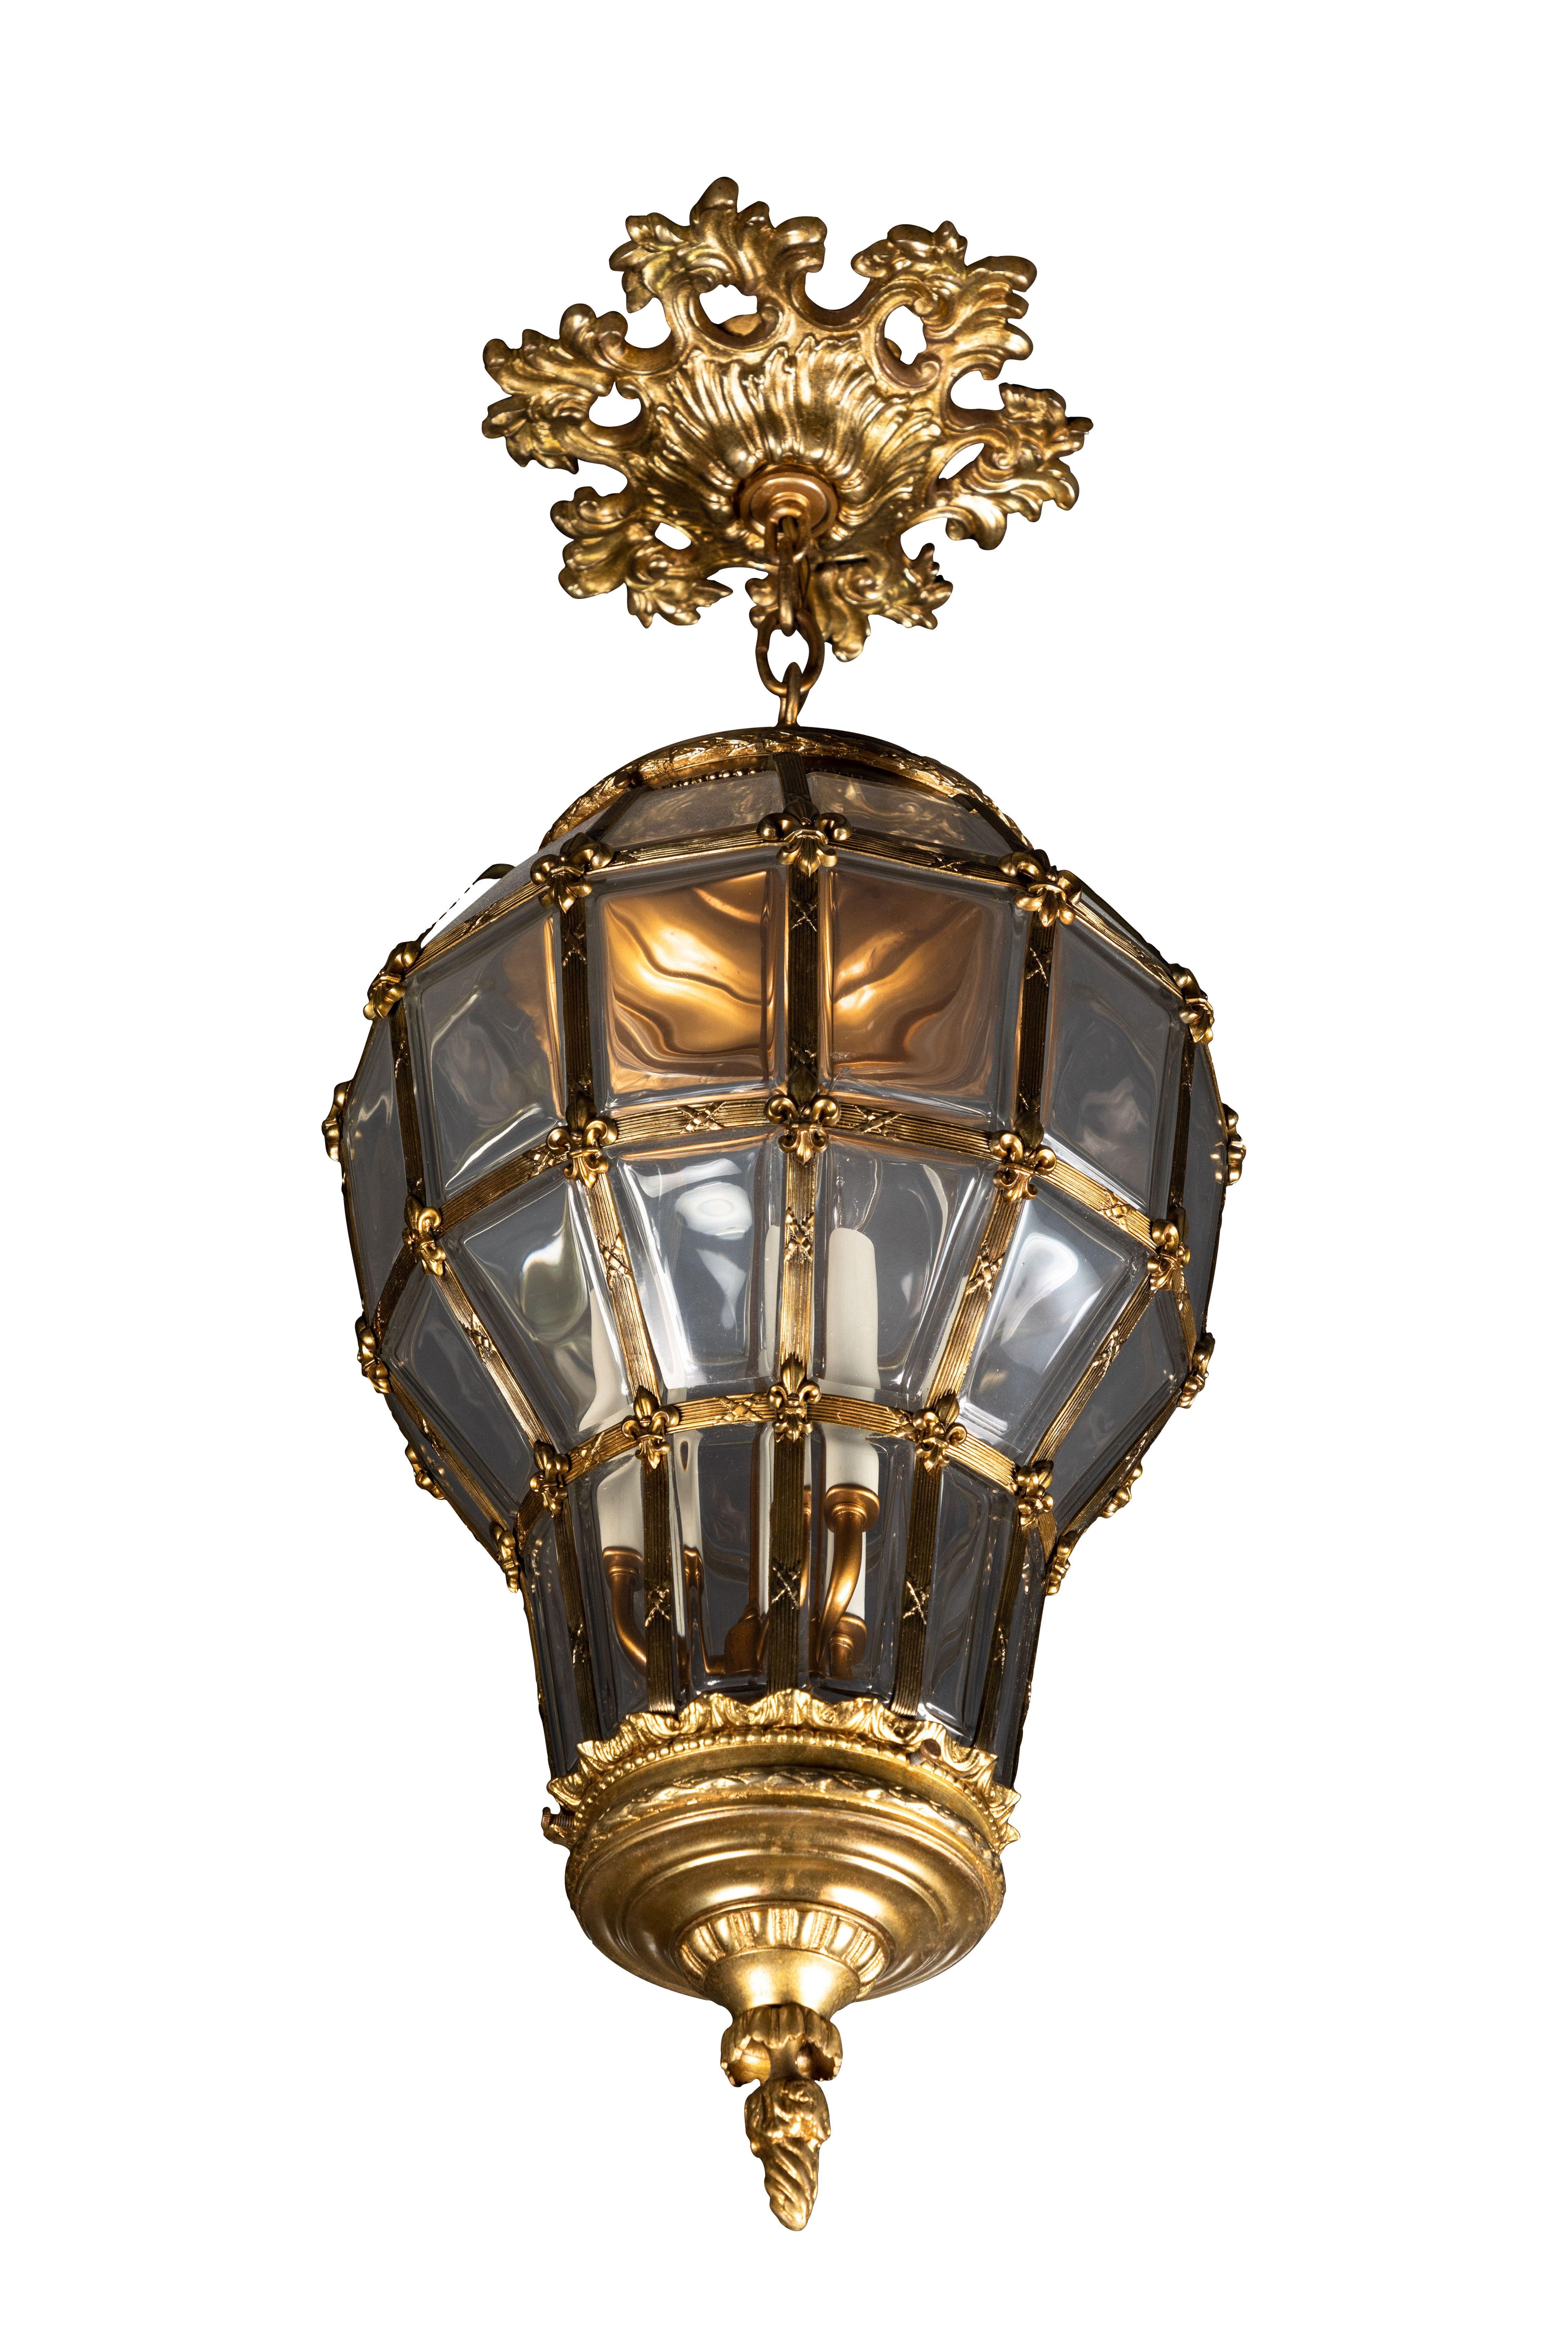 Large antique Louis XV style glass hanging lantern with ceiling escutcheon, gilt metal, and glass. The lantern takes three candelabra bulbs. The drop is on a variable chain.